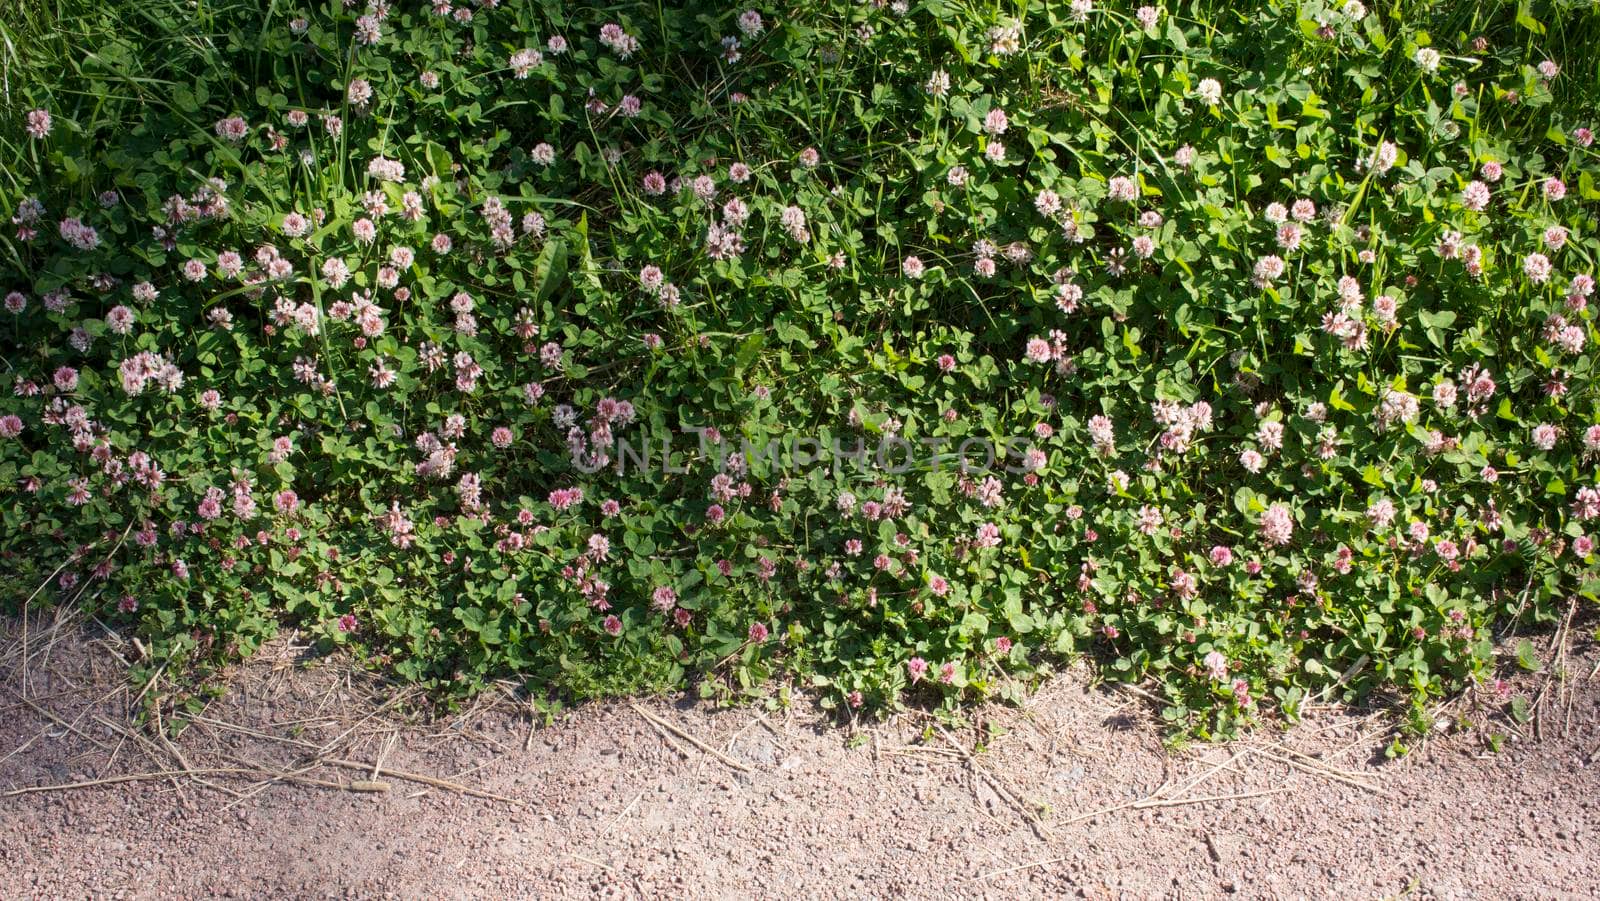 Color photo of the edge of a sandy road in the middle of a blooming field of clover in the grass. High quality photo